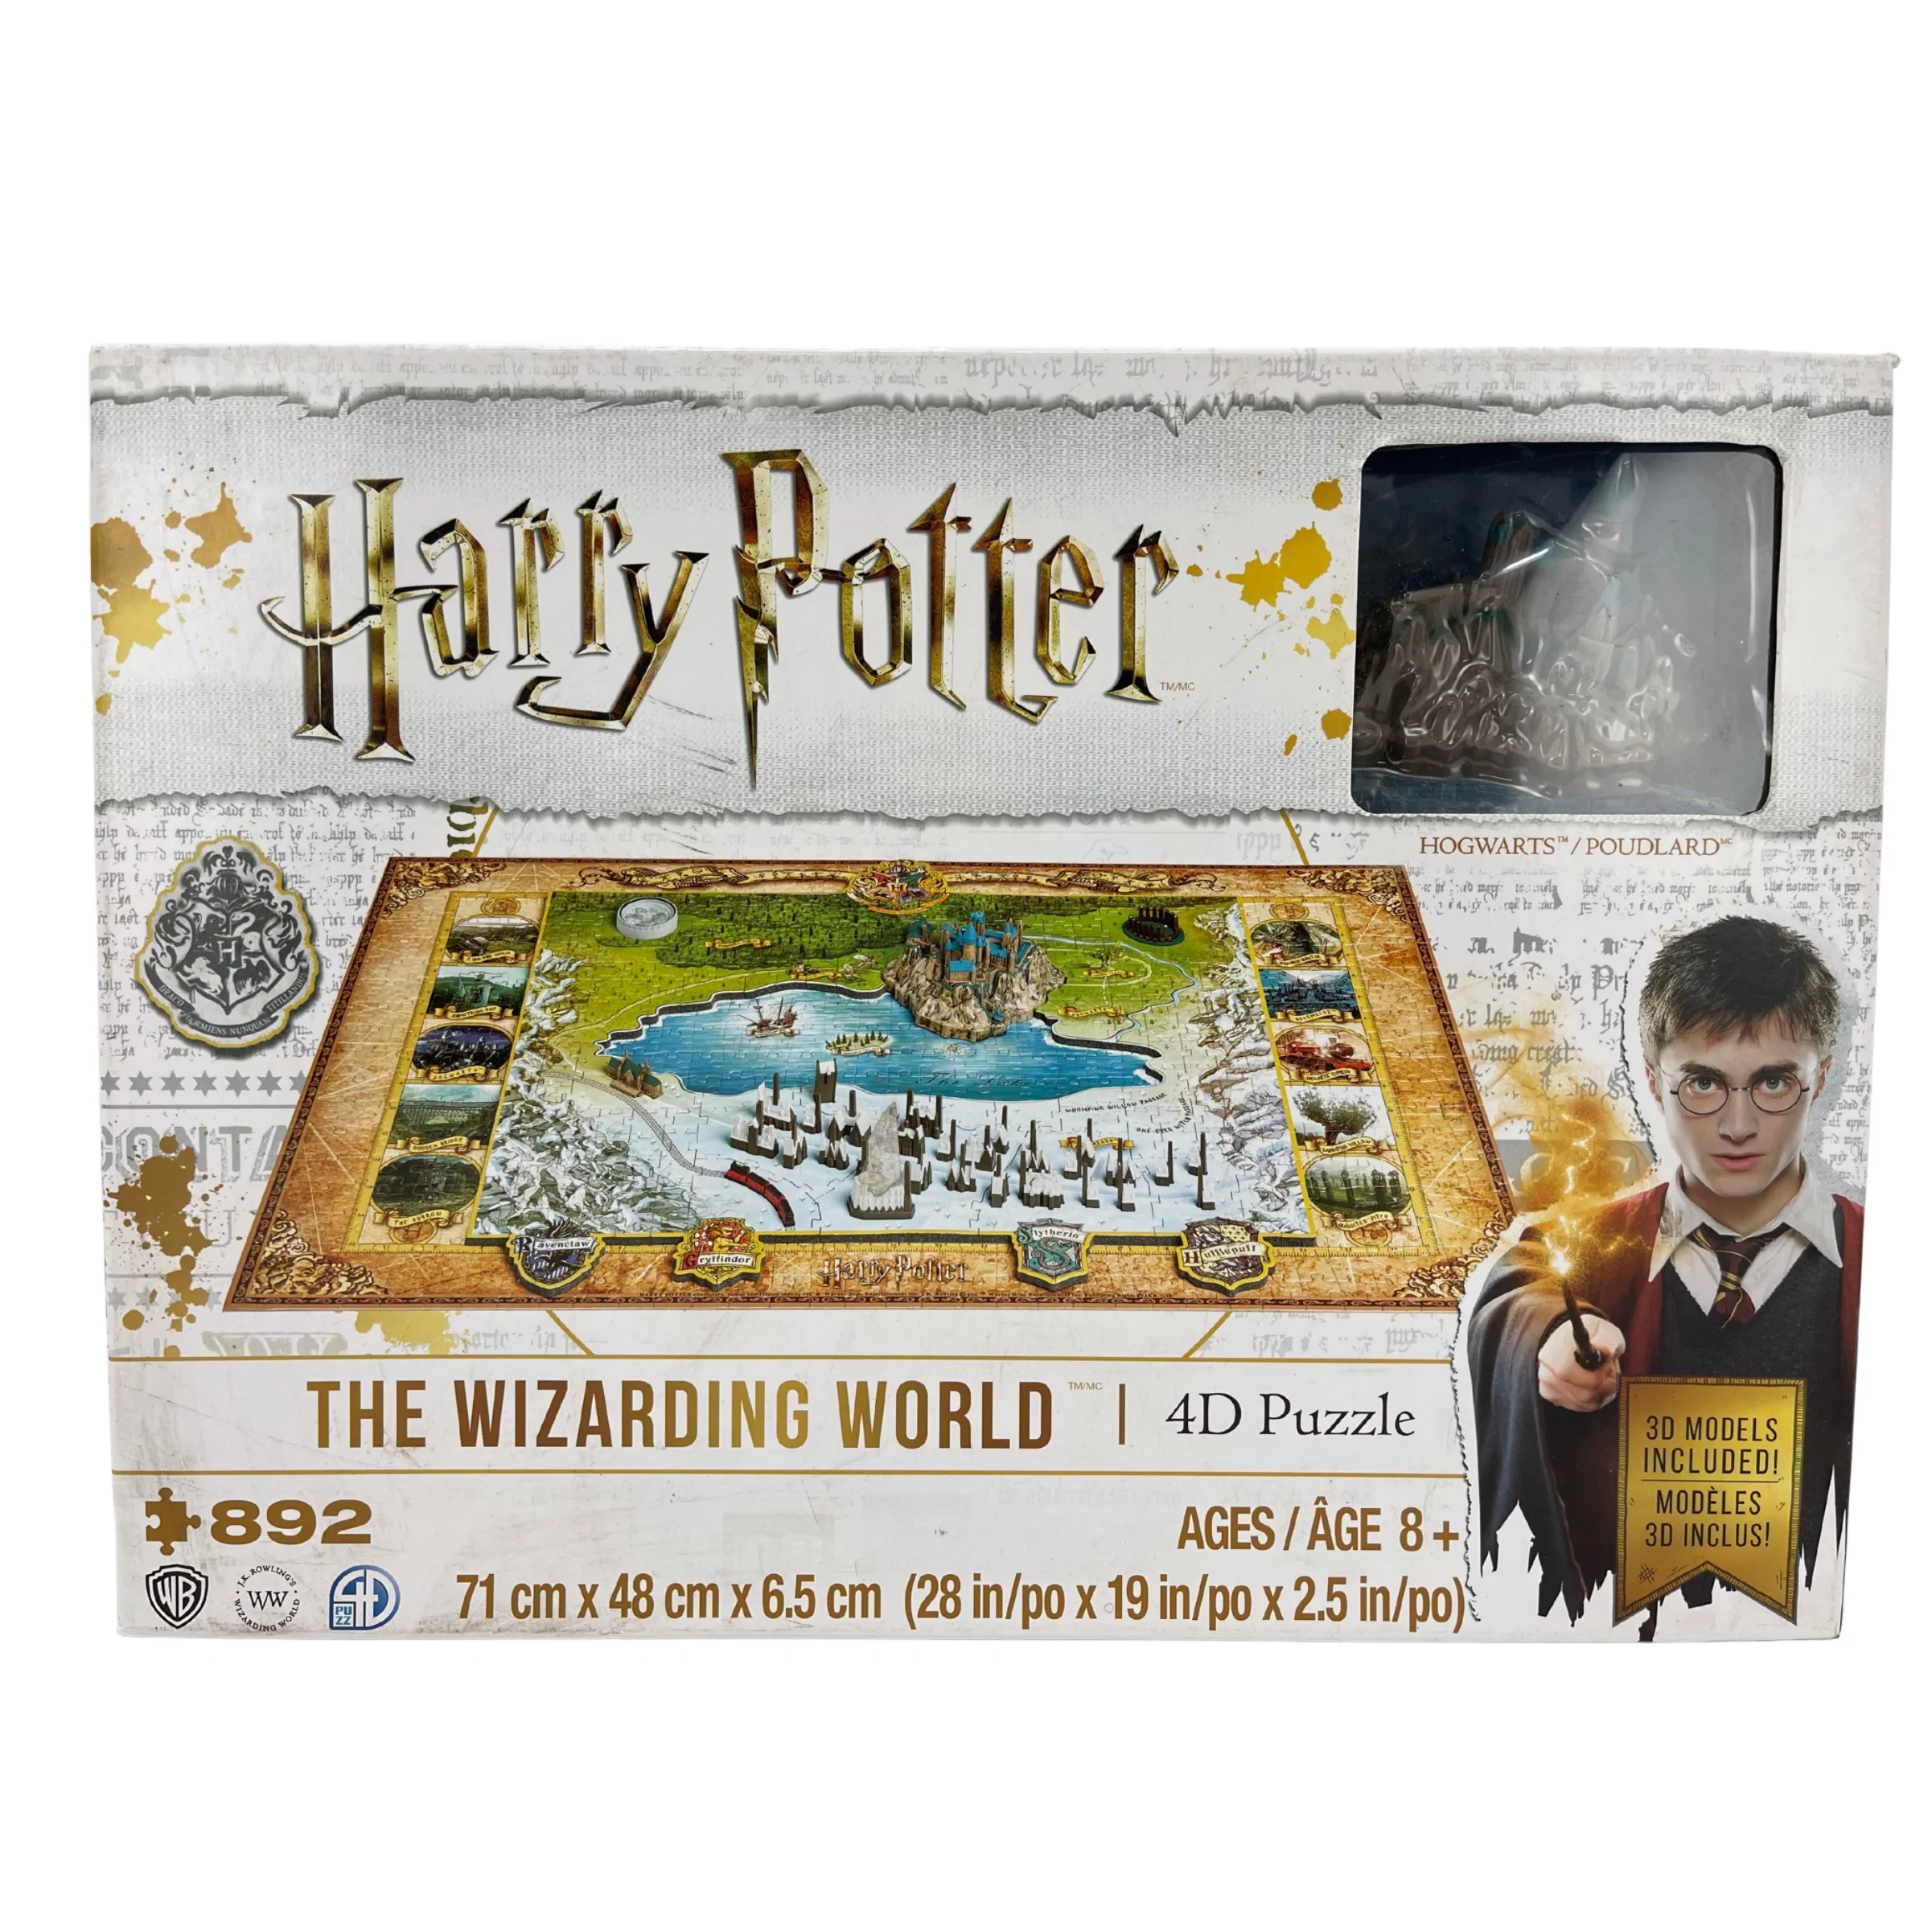 Harry Potter 4D Puzzle / The Wizarding World / 829 Pieces